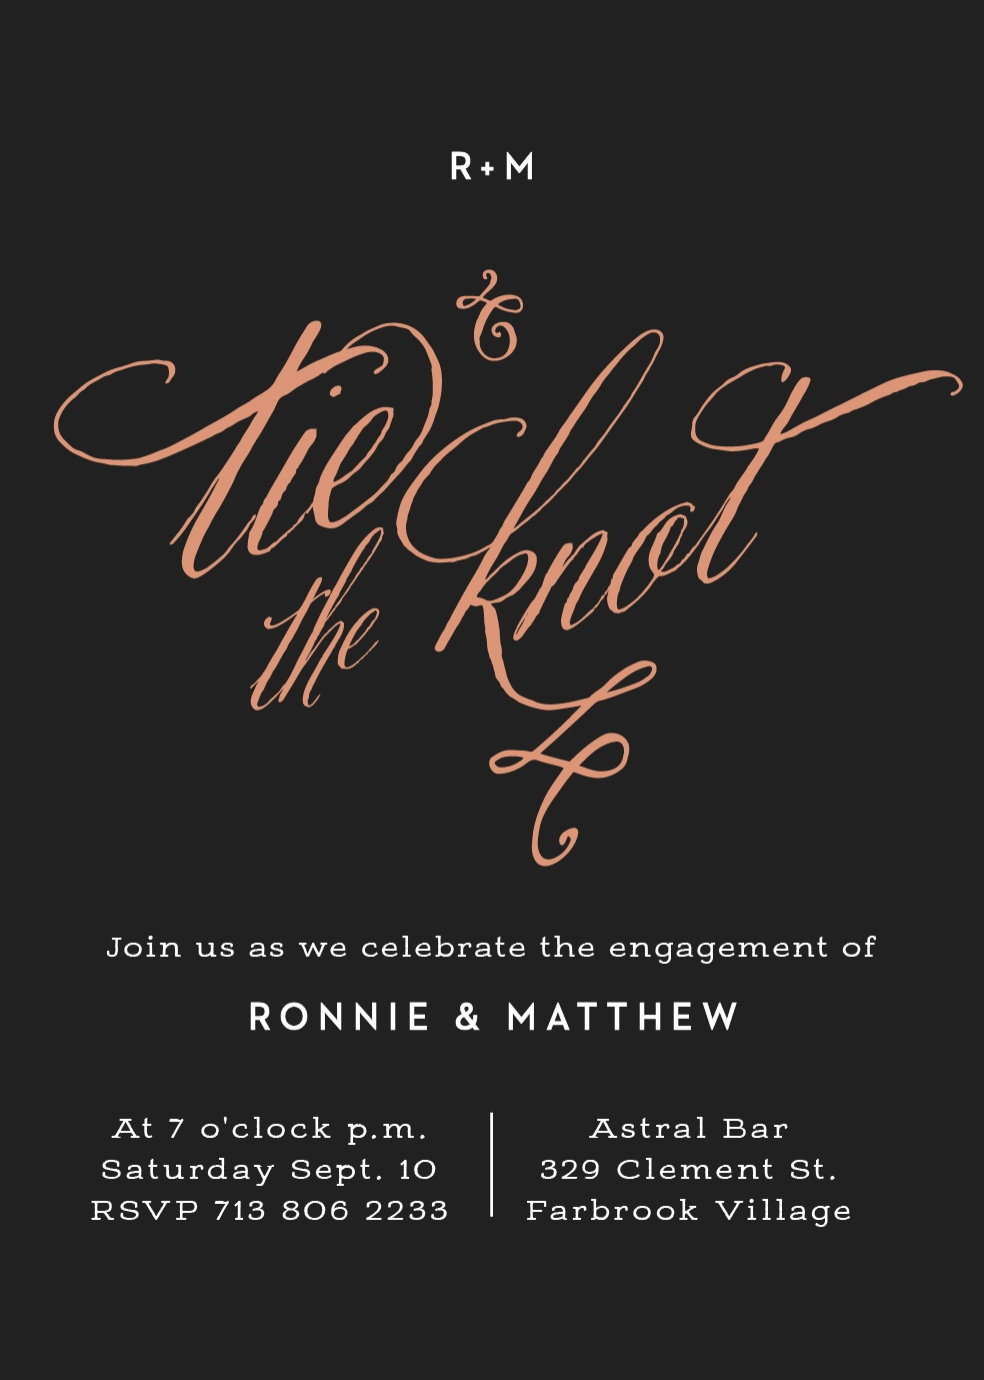 Engagement Party Foil Invitation from Basic Invite